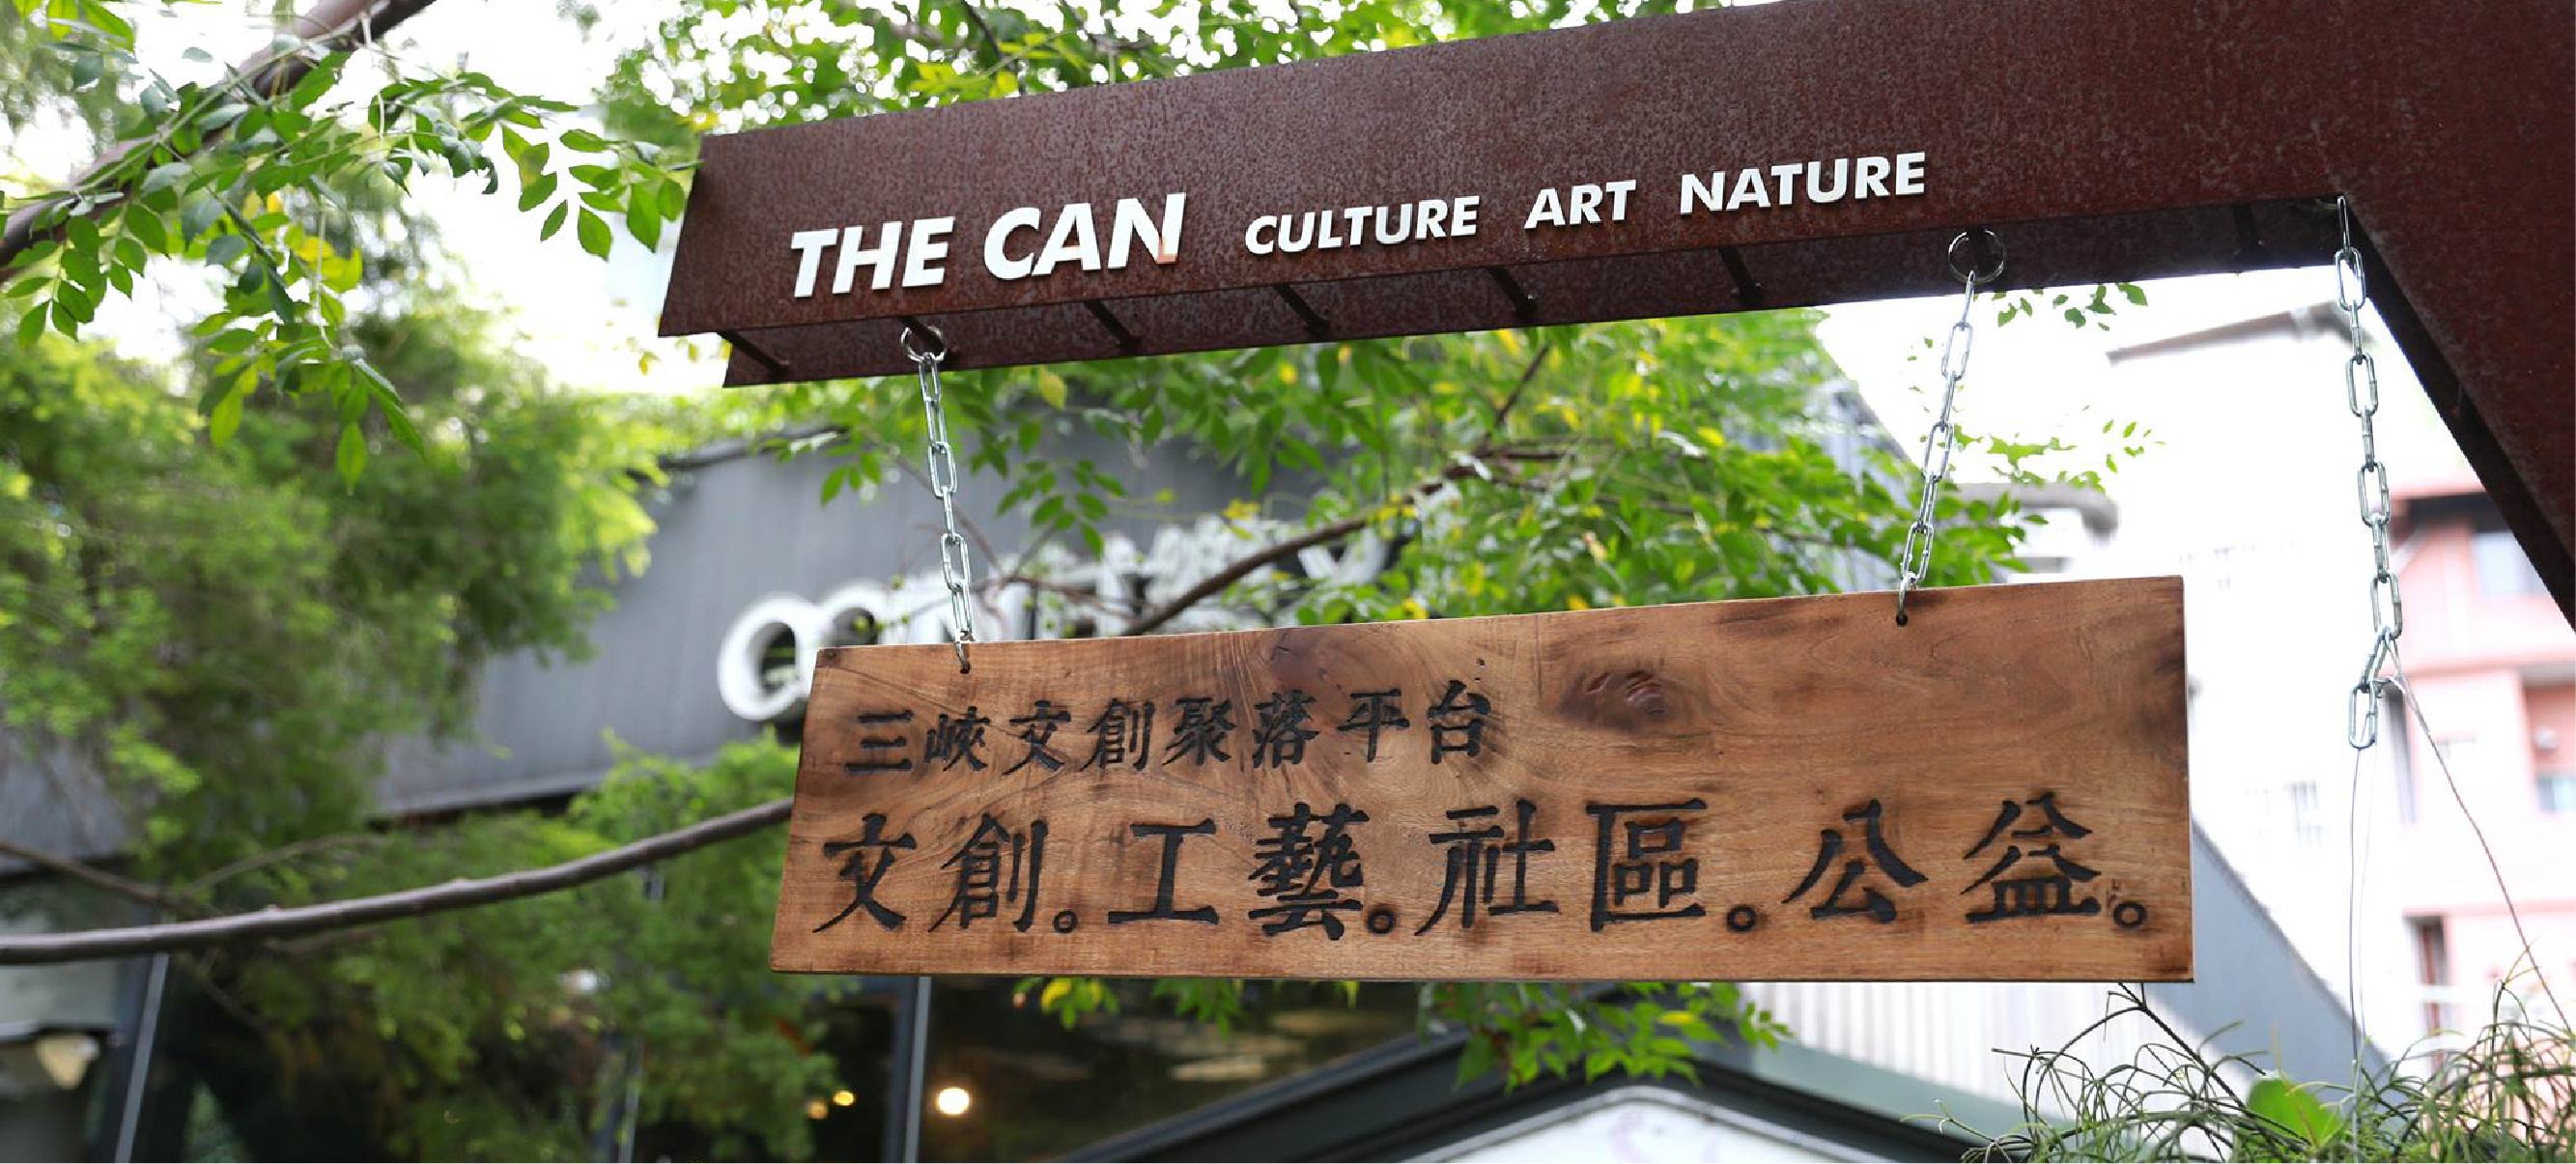 we established CAN Culture, Art & Nature in 2010, hoping that it would become a cultural and creative social enterprise that is good for society and community. We wanted to drive urban and rural sustainable development through the infiltration of culture and creativity, invest resources to construct a caring system for disadvantaged students, accompany children in their growth, create dreams for children, and have the power to change the future.  | Taipei Cultural experience | CAN Culture